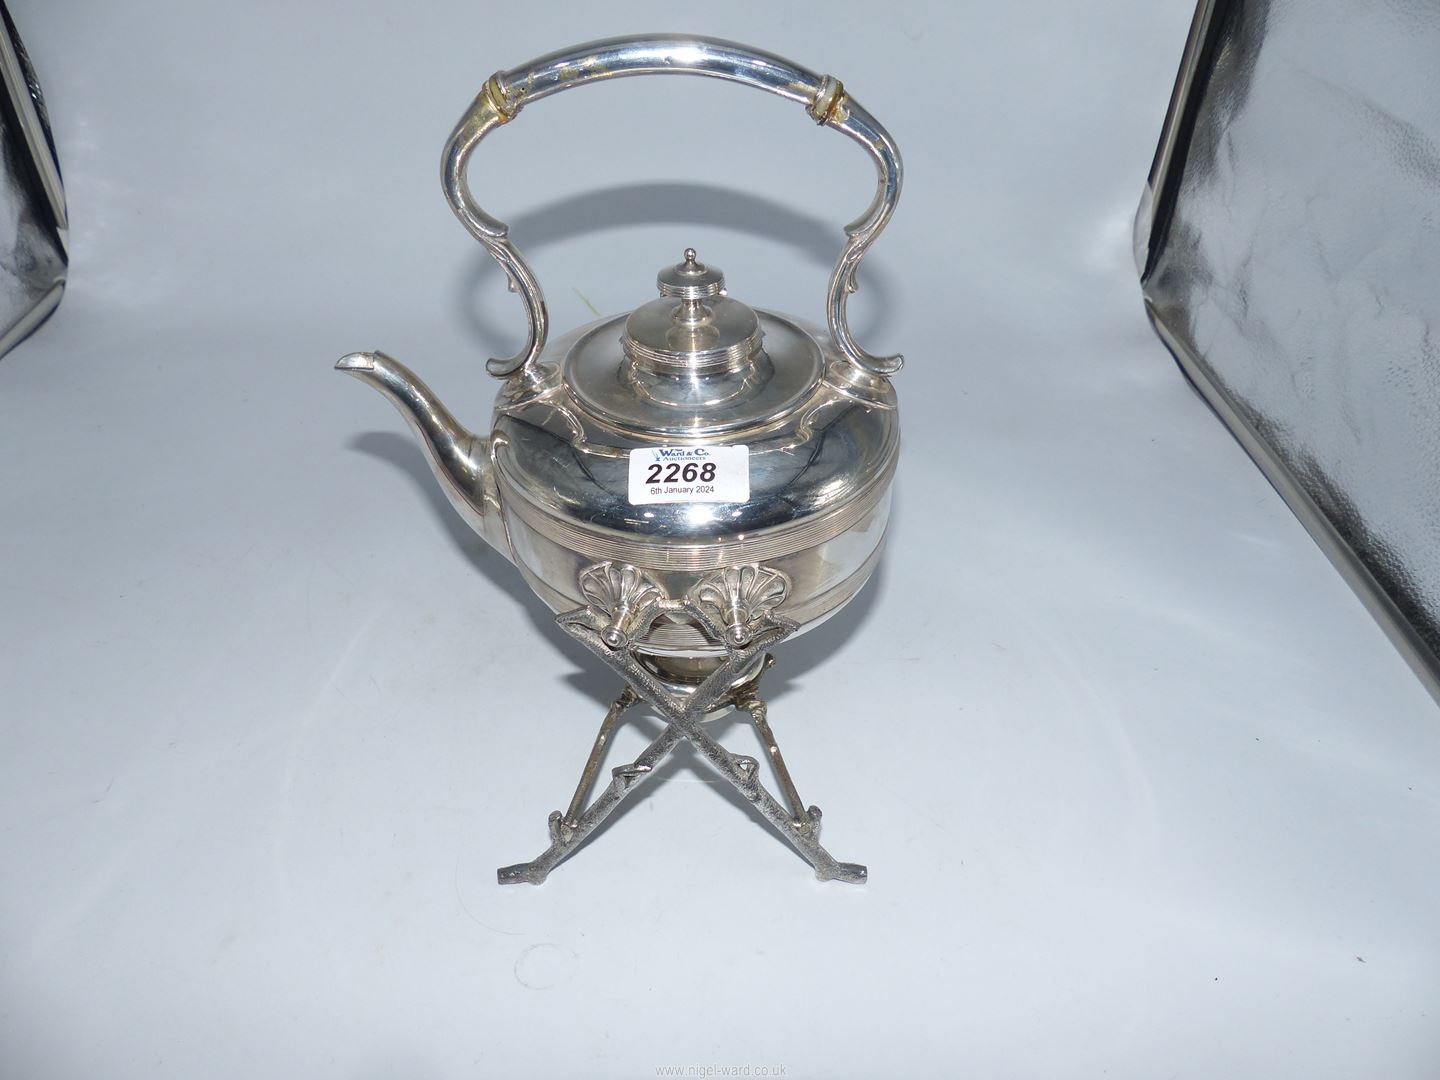 A silver plated spirit kettle with a burner.